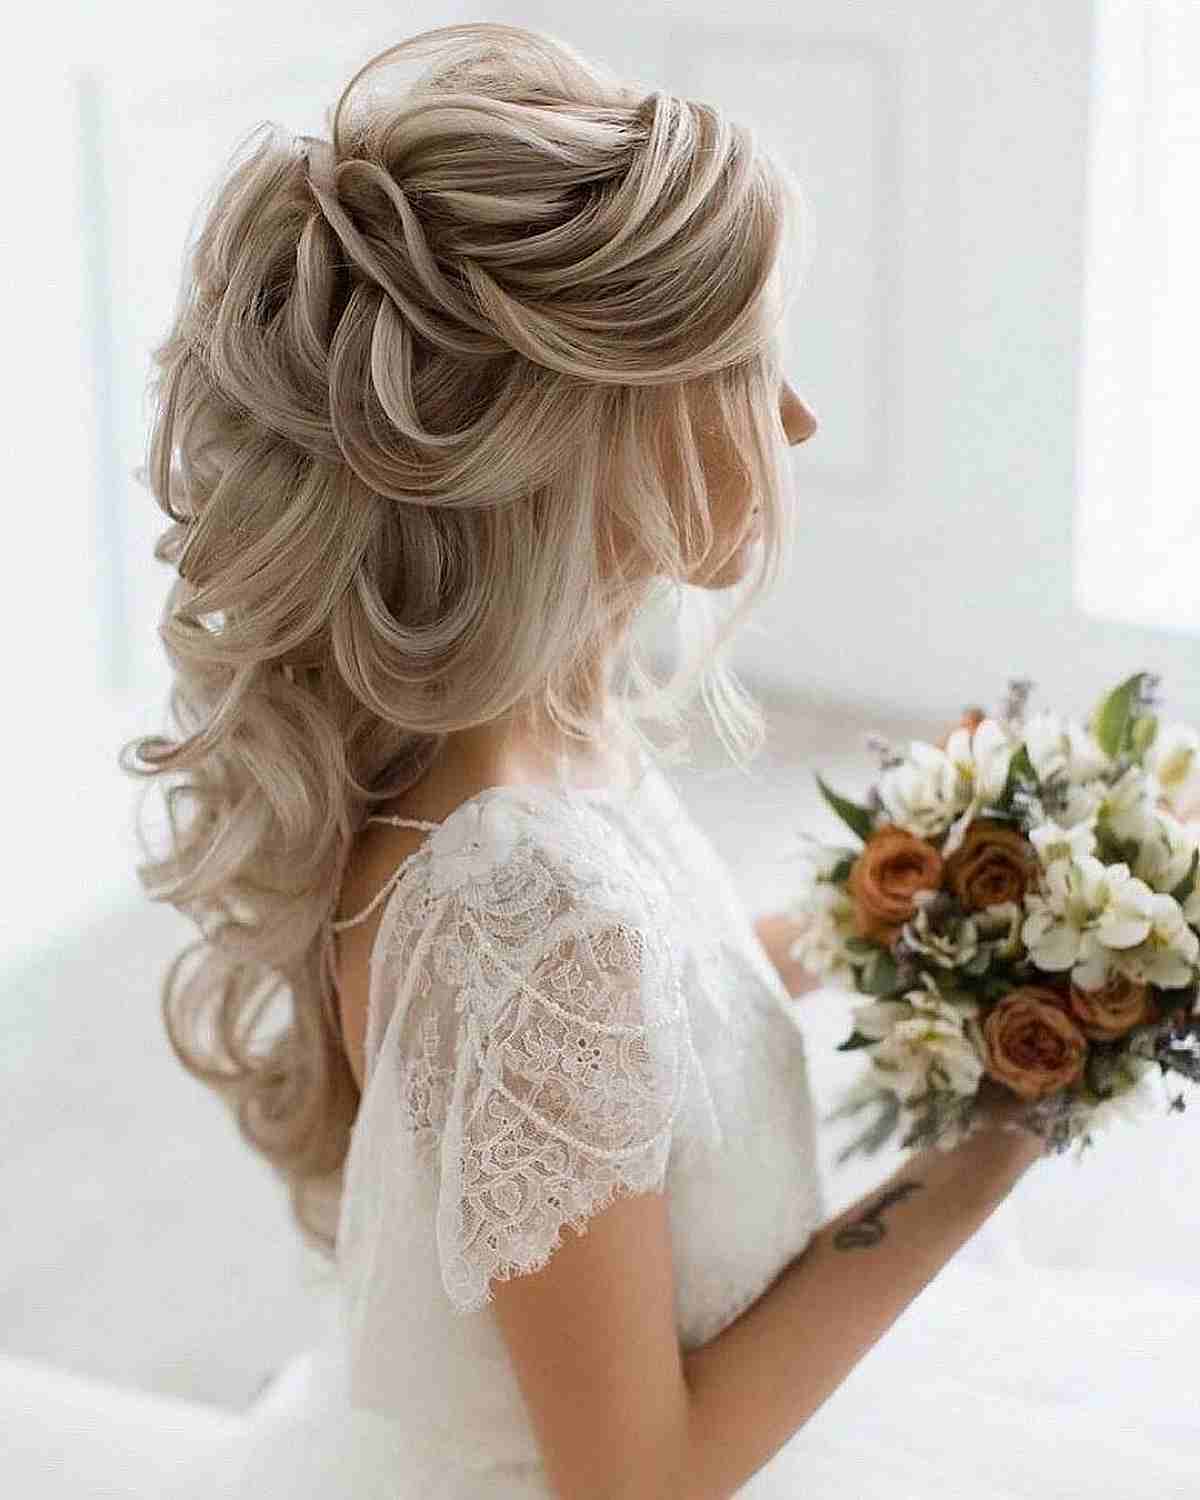 Formal Soft and Messy Blonde Half Updo